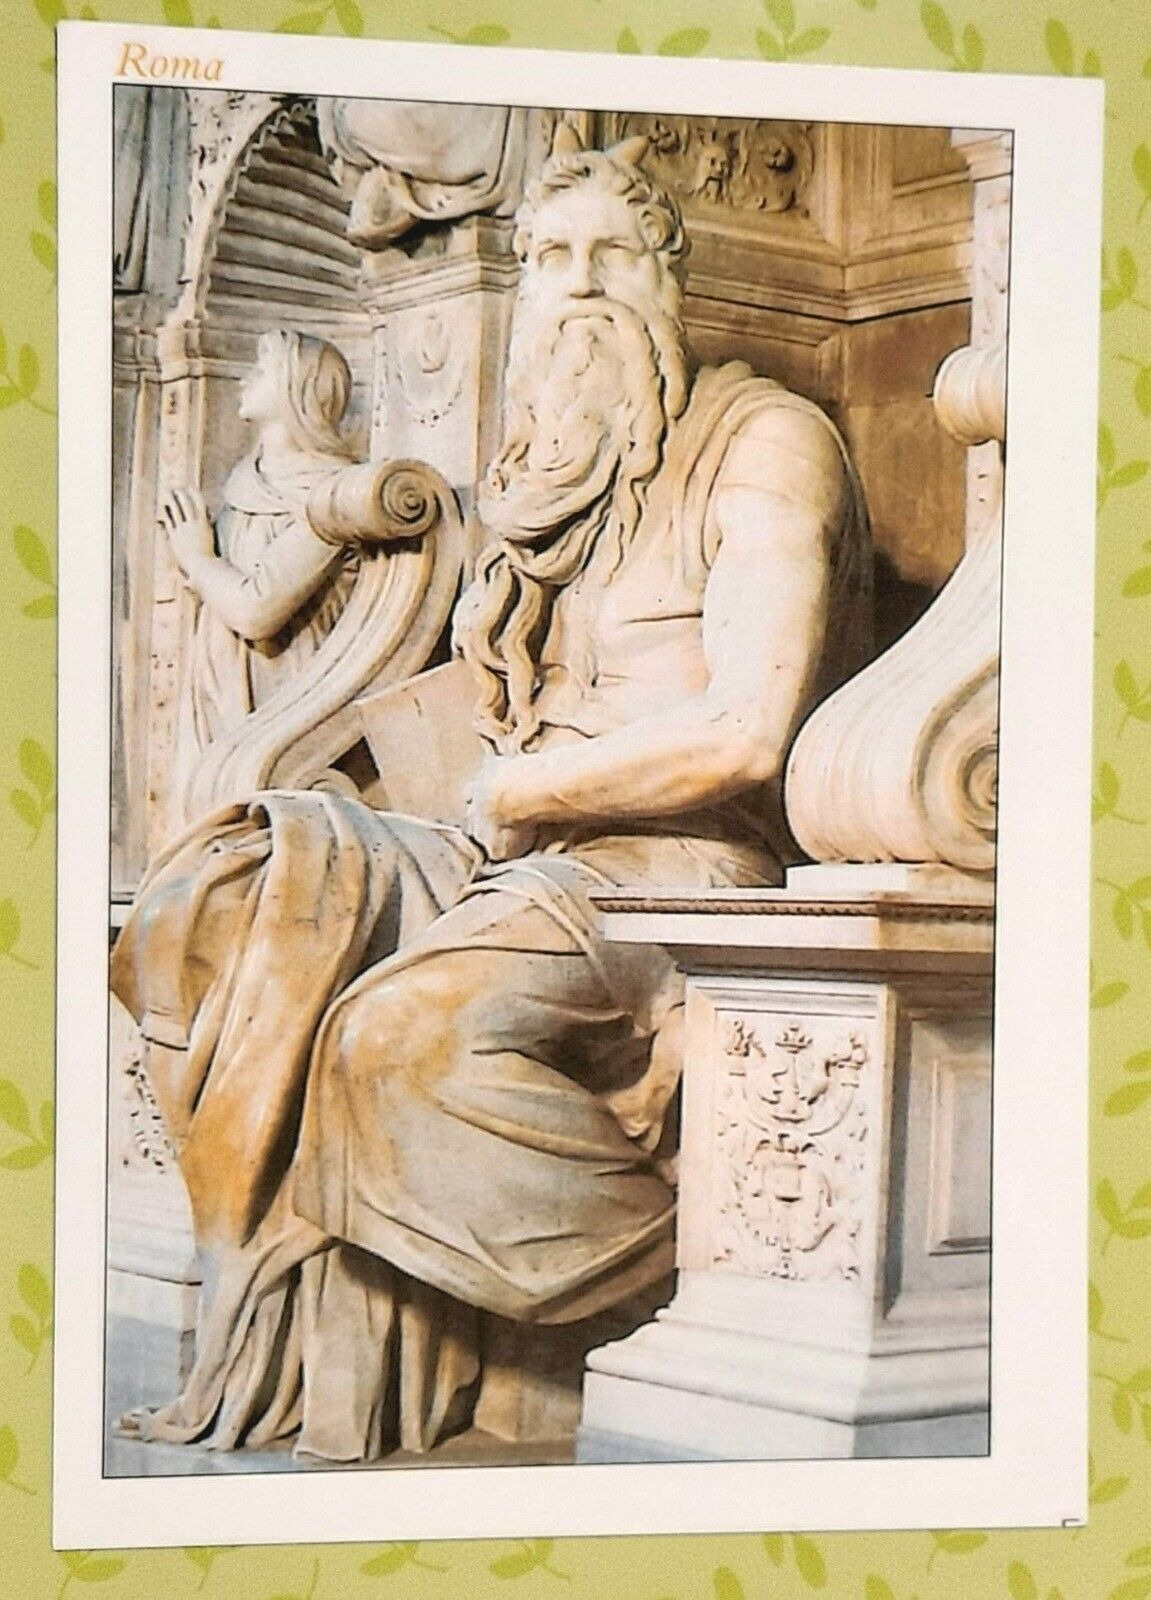 VTG Unused Postcard~ Rome Italy~ Moses of Michelangelo ~Ready to be Used